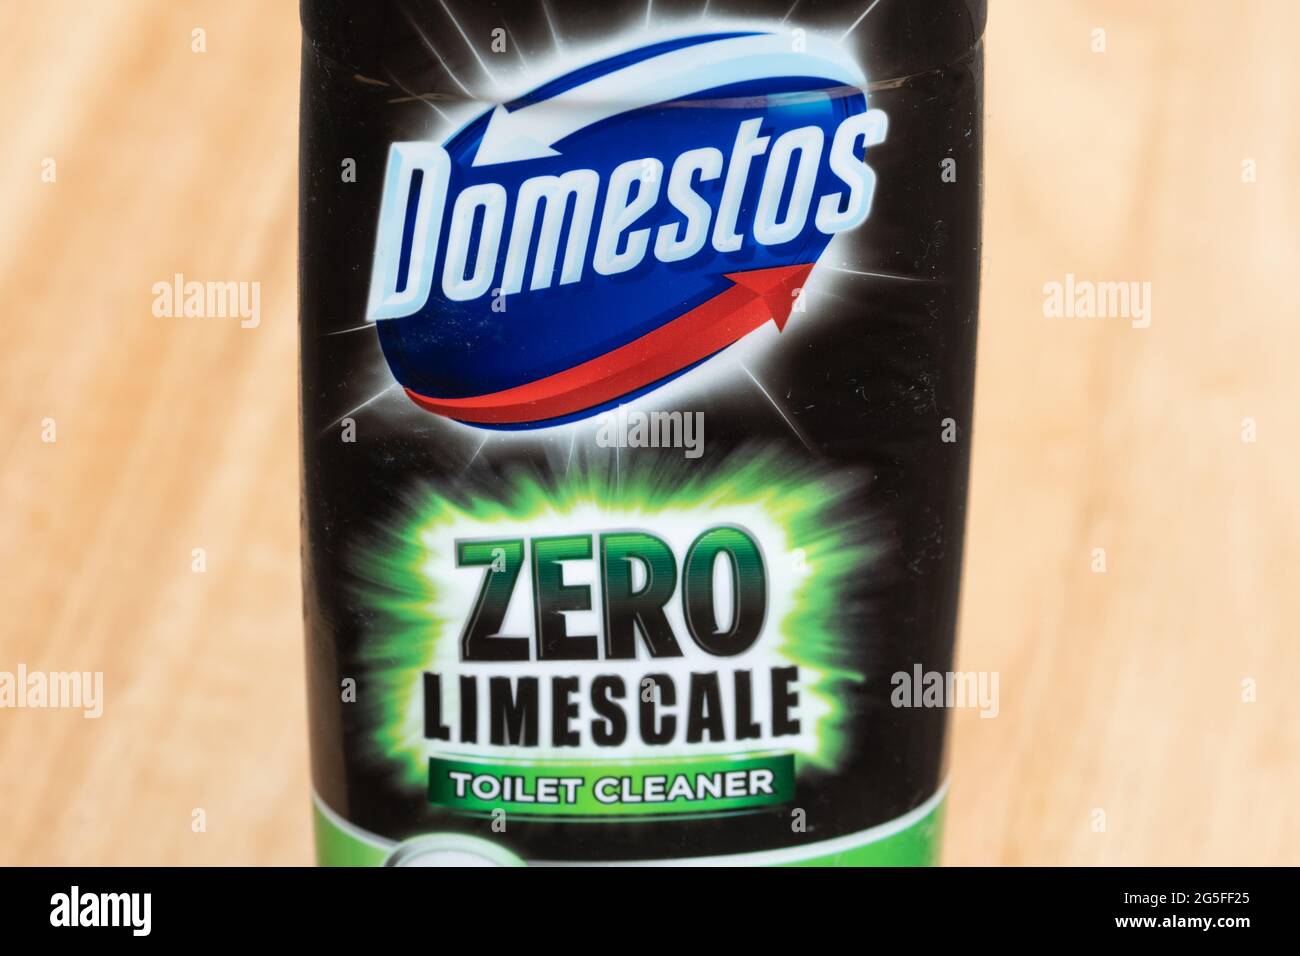 Bottle of Domestos zero limescale bleach, cleaning product in black bottle Stock Photo